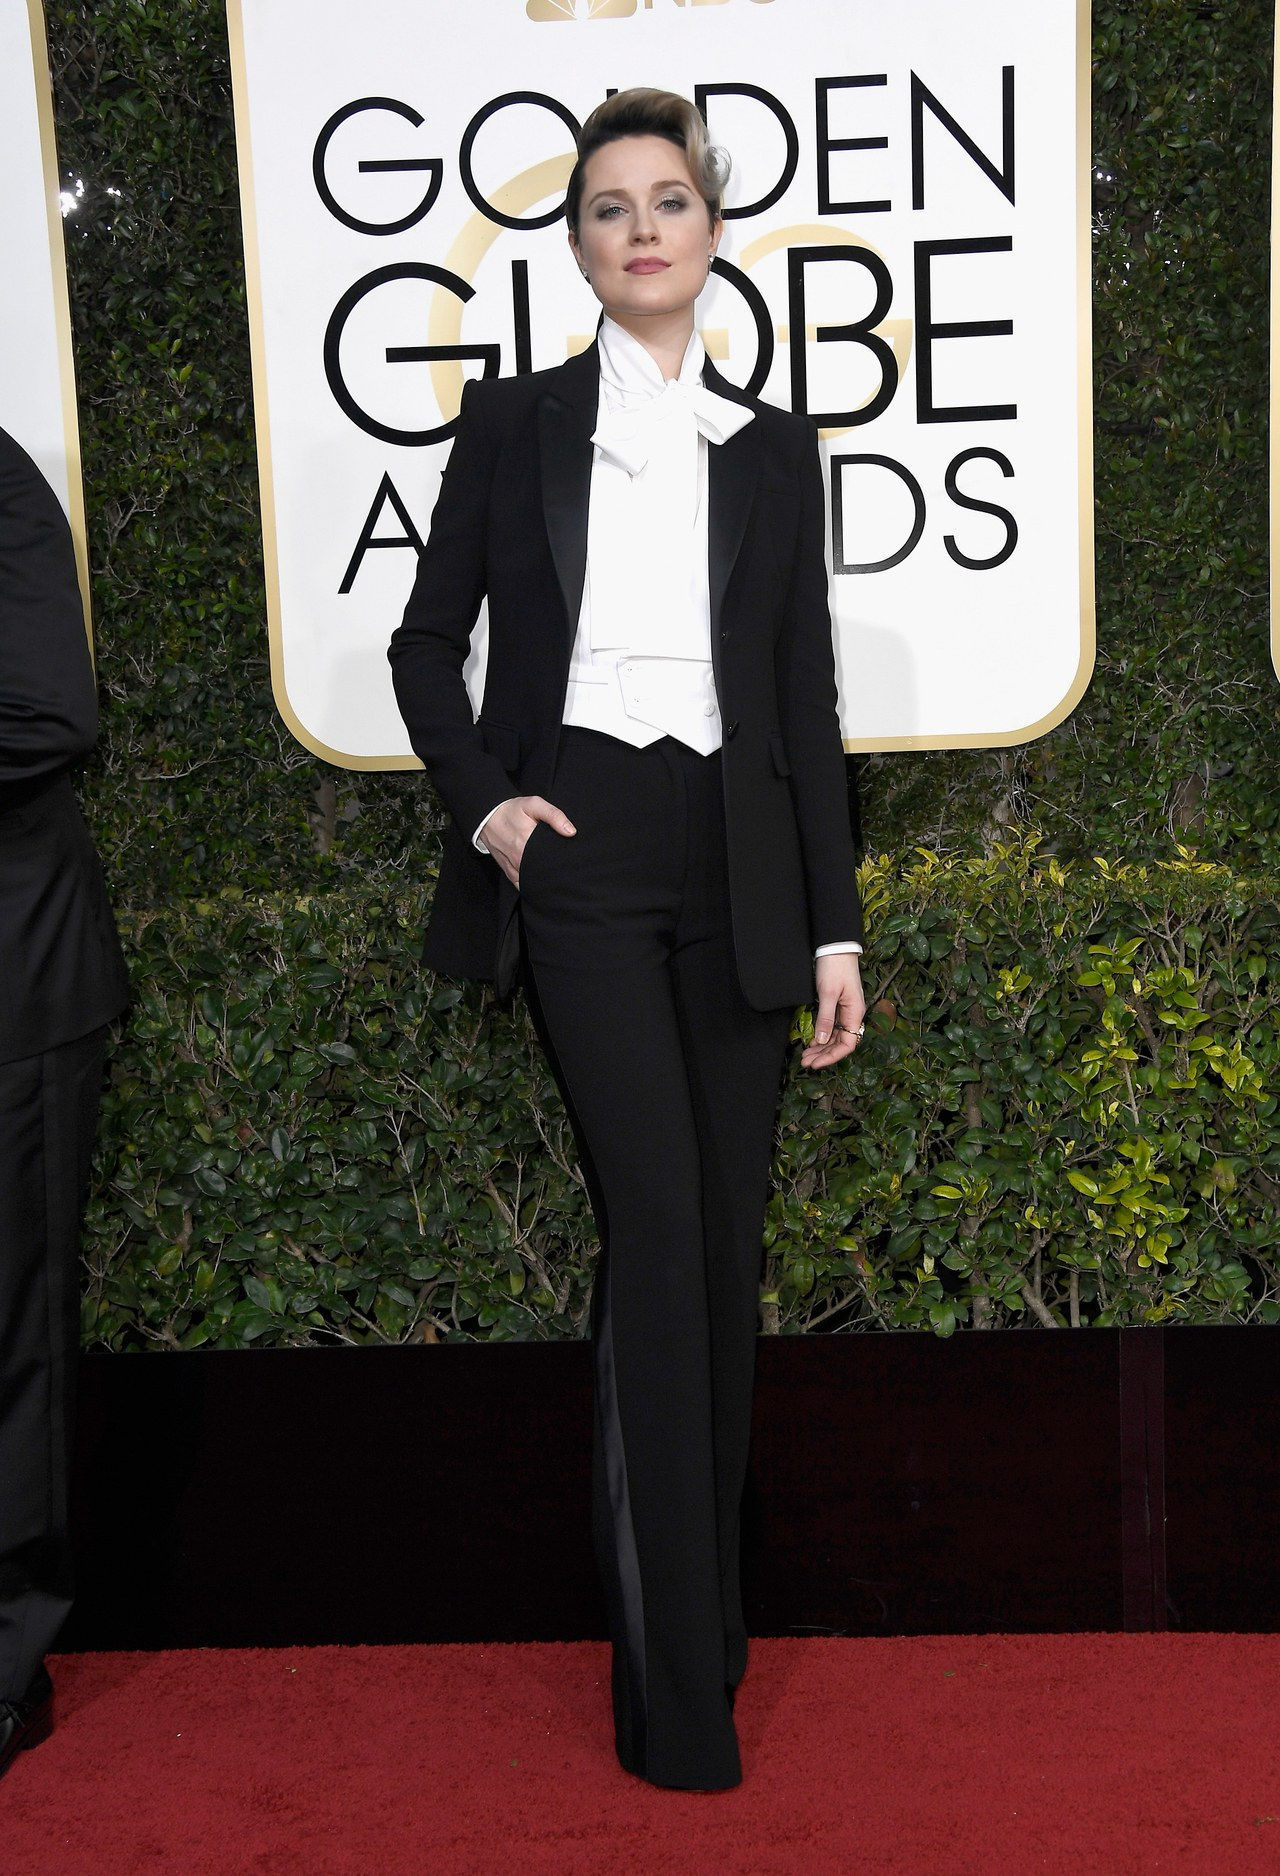 BEVERLY HILLS, CA - JANUARY 08: Actress Evan Rachel Wood attends the 74th Annual Golden Globe Awards at The Beverly Hilton Hotel on January 8, 2017 in Beverly Hills, California. (Photo by Frazer Harrison/Getty Images)